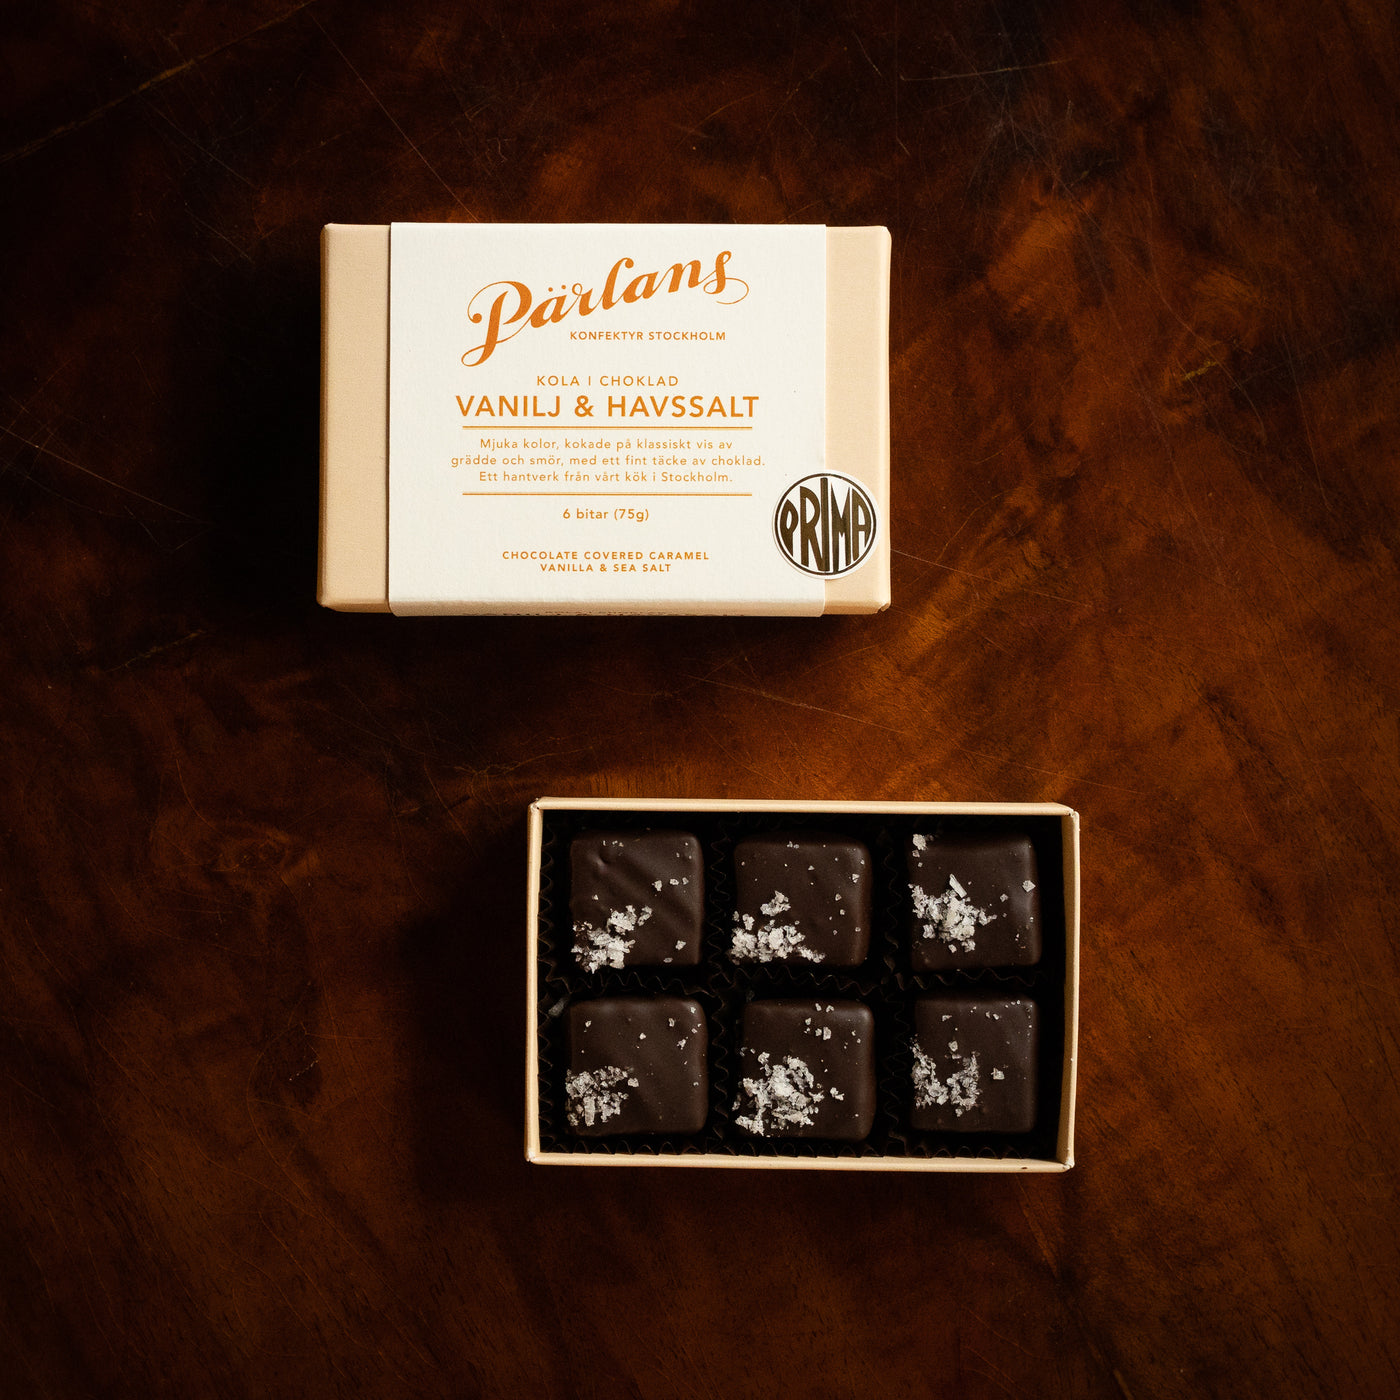 A charming box with six pieces of your favourite caramel, dipped in chocolate. Treat yourself or someone you love! <br><br>VANILLA & SEA SALT – A silky smooth, chocolate covered caramel with a sprinkling of sea salt that enhances the warmth of Bourbon vanilla.